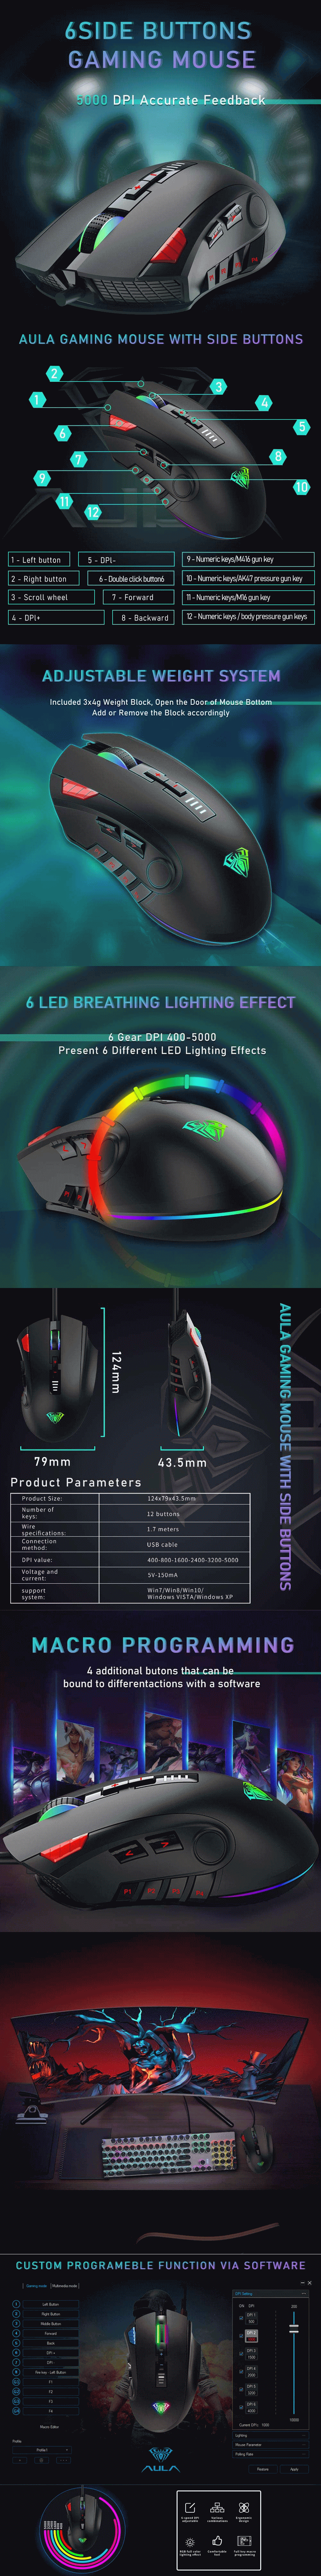 Aula f809 Gaming Mouse